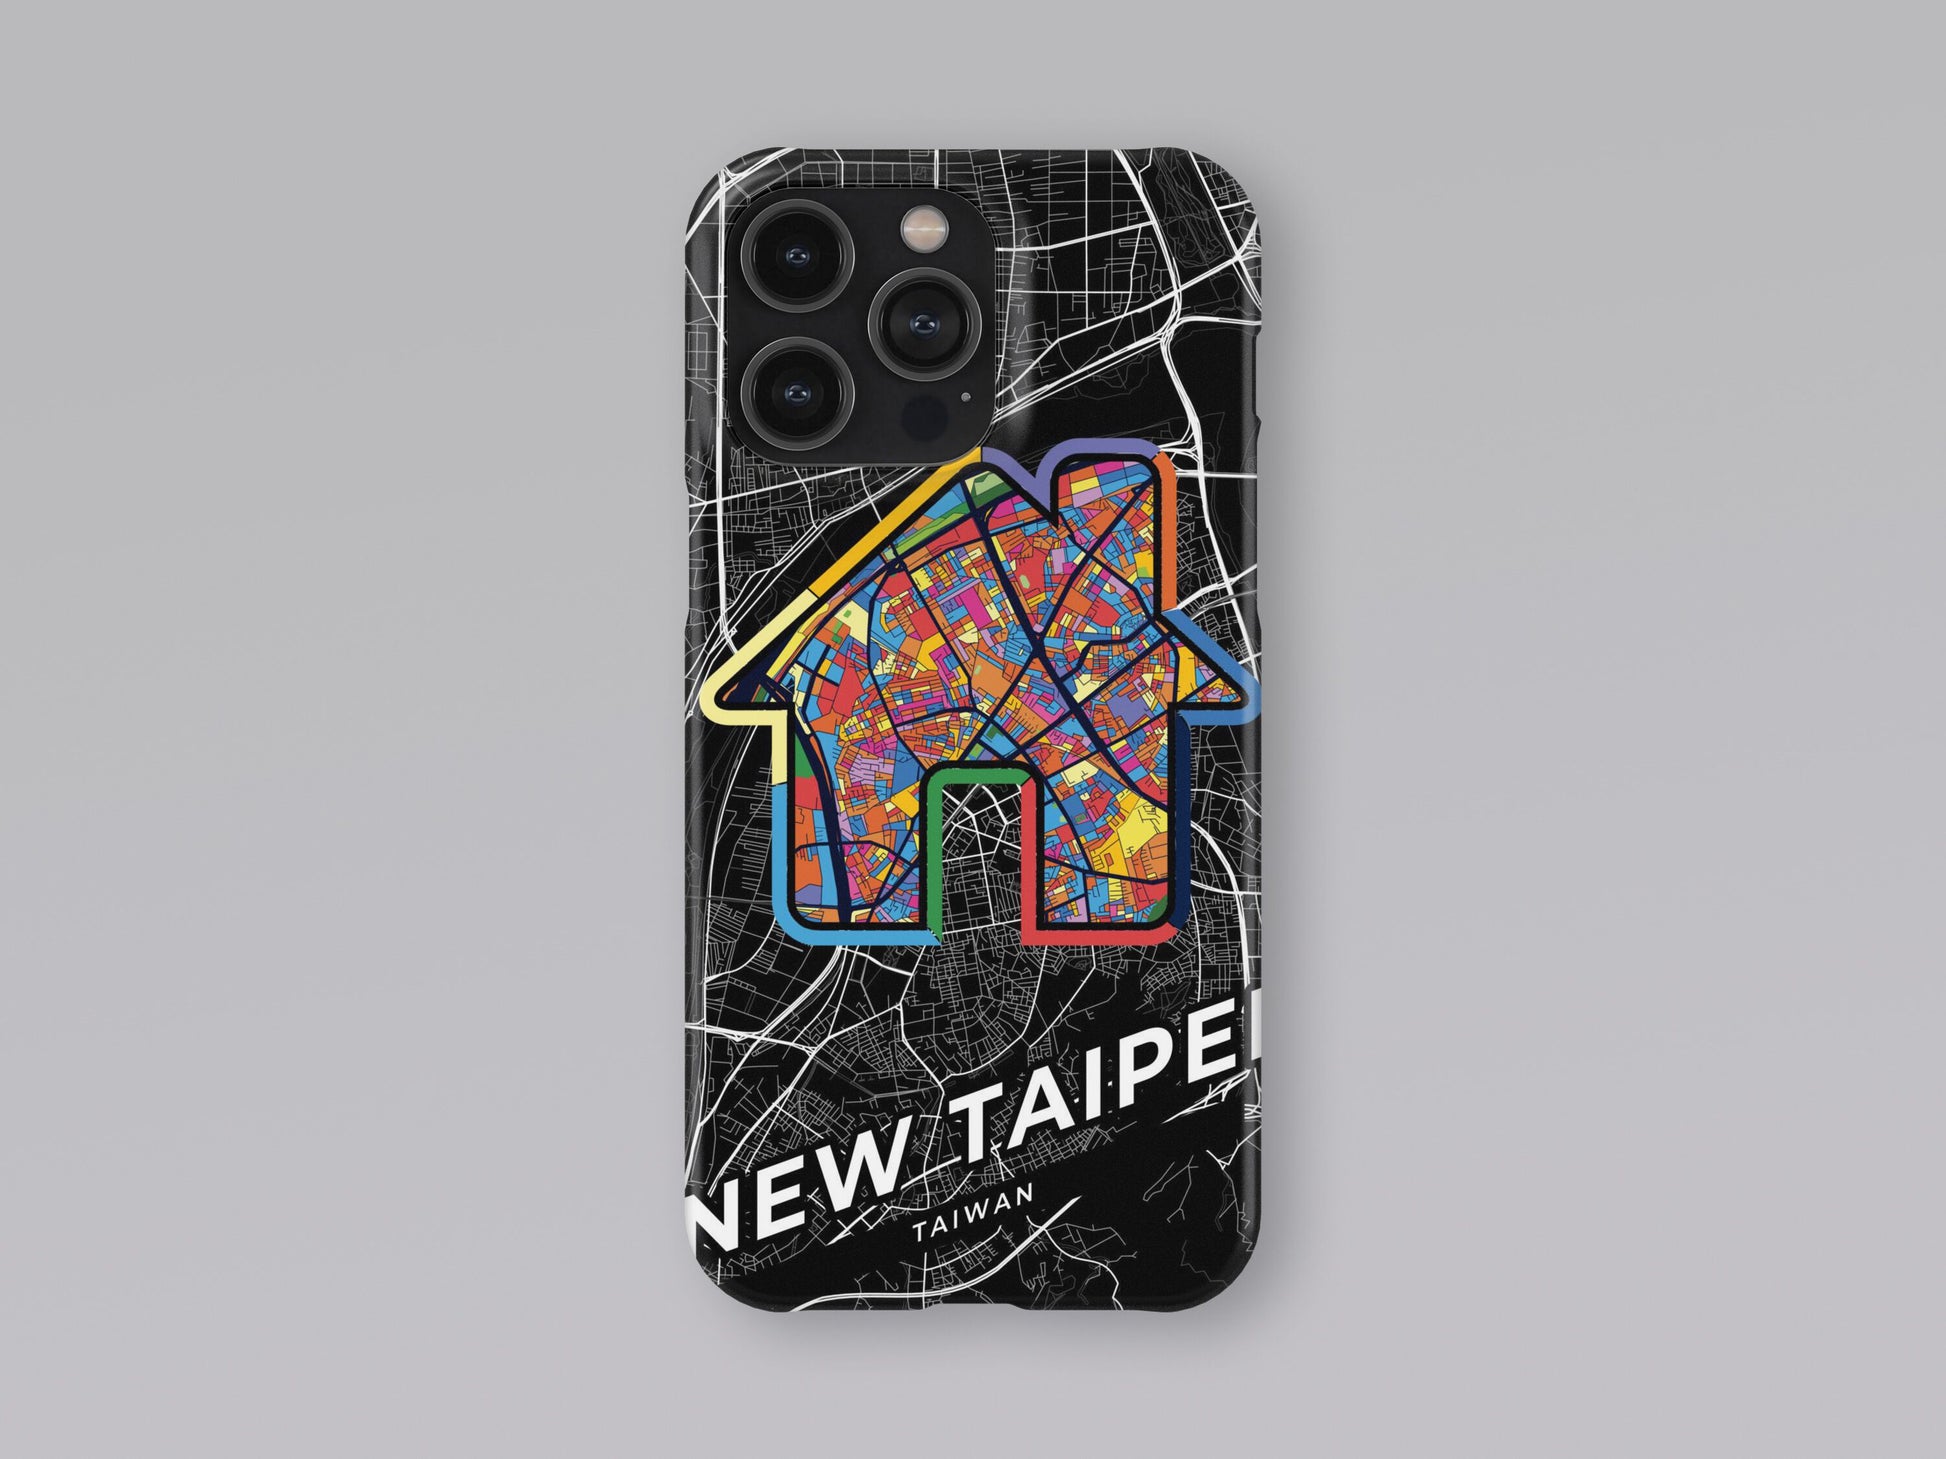 New Taipei Taiwan slim phone case with colorful icon 3